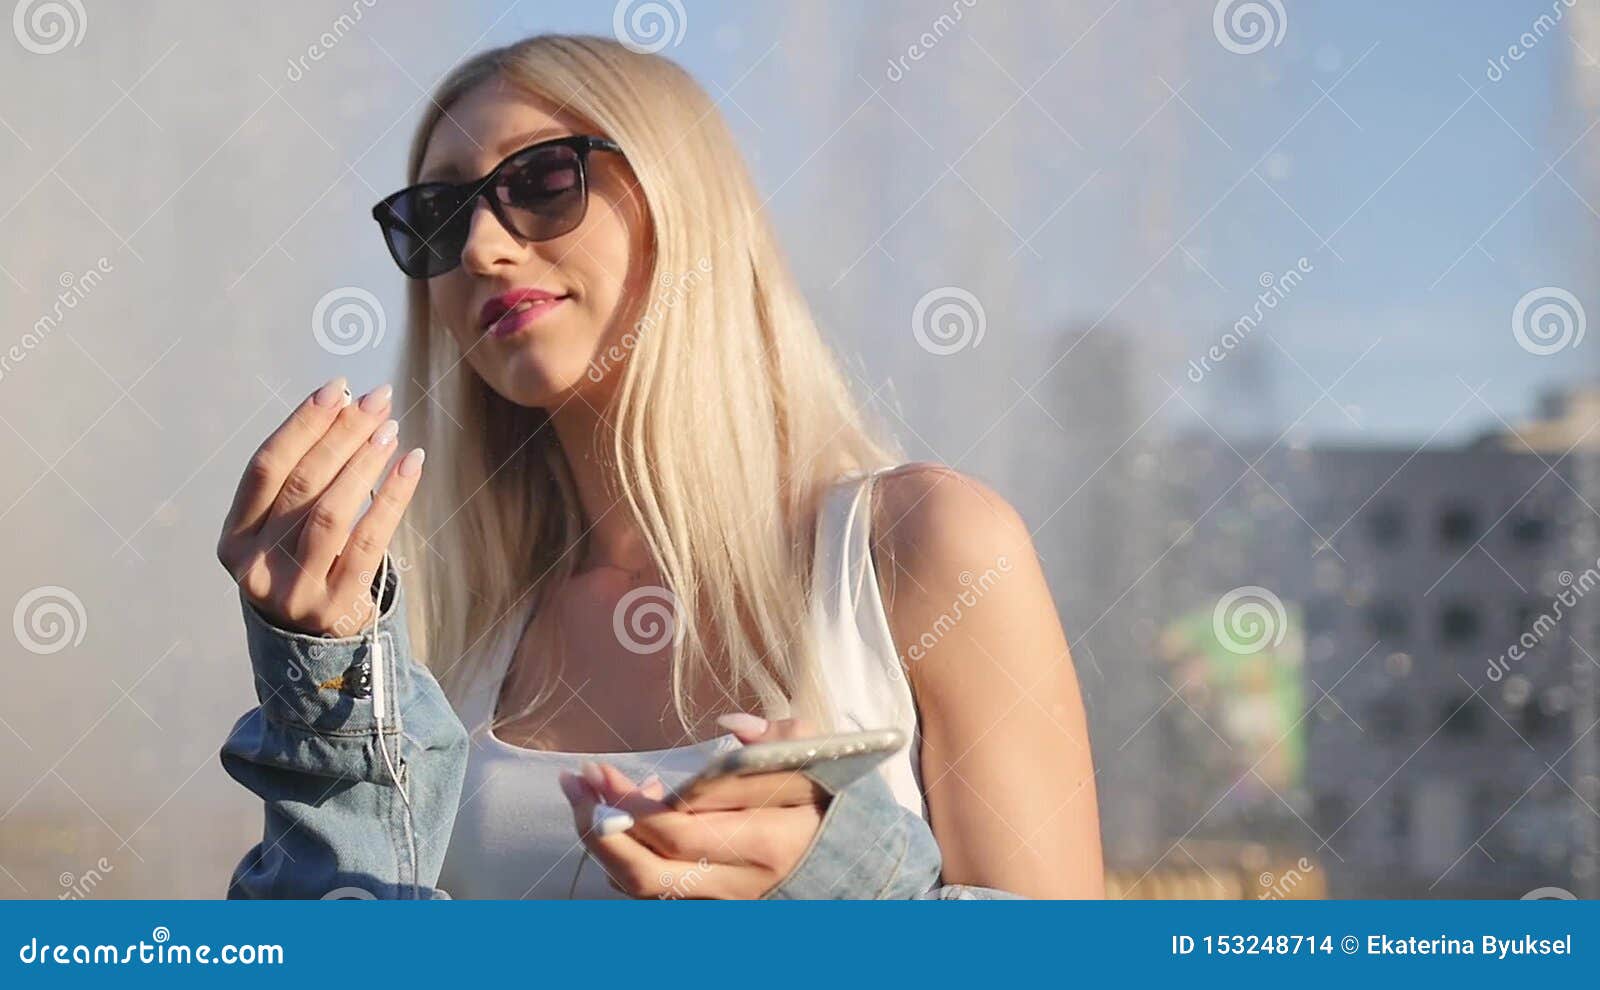 Attractive Blonde Smothers Music On Her Smartphone Outdoors Woman